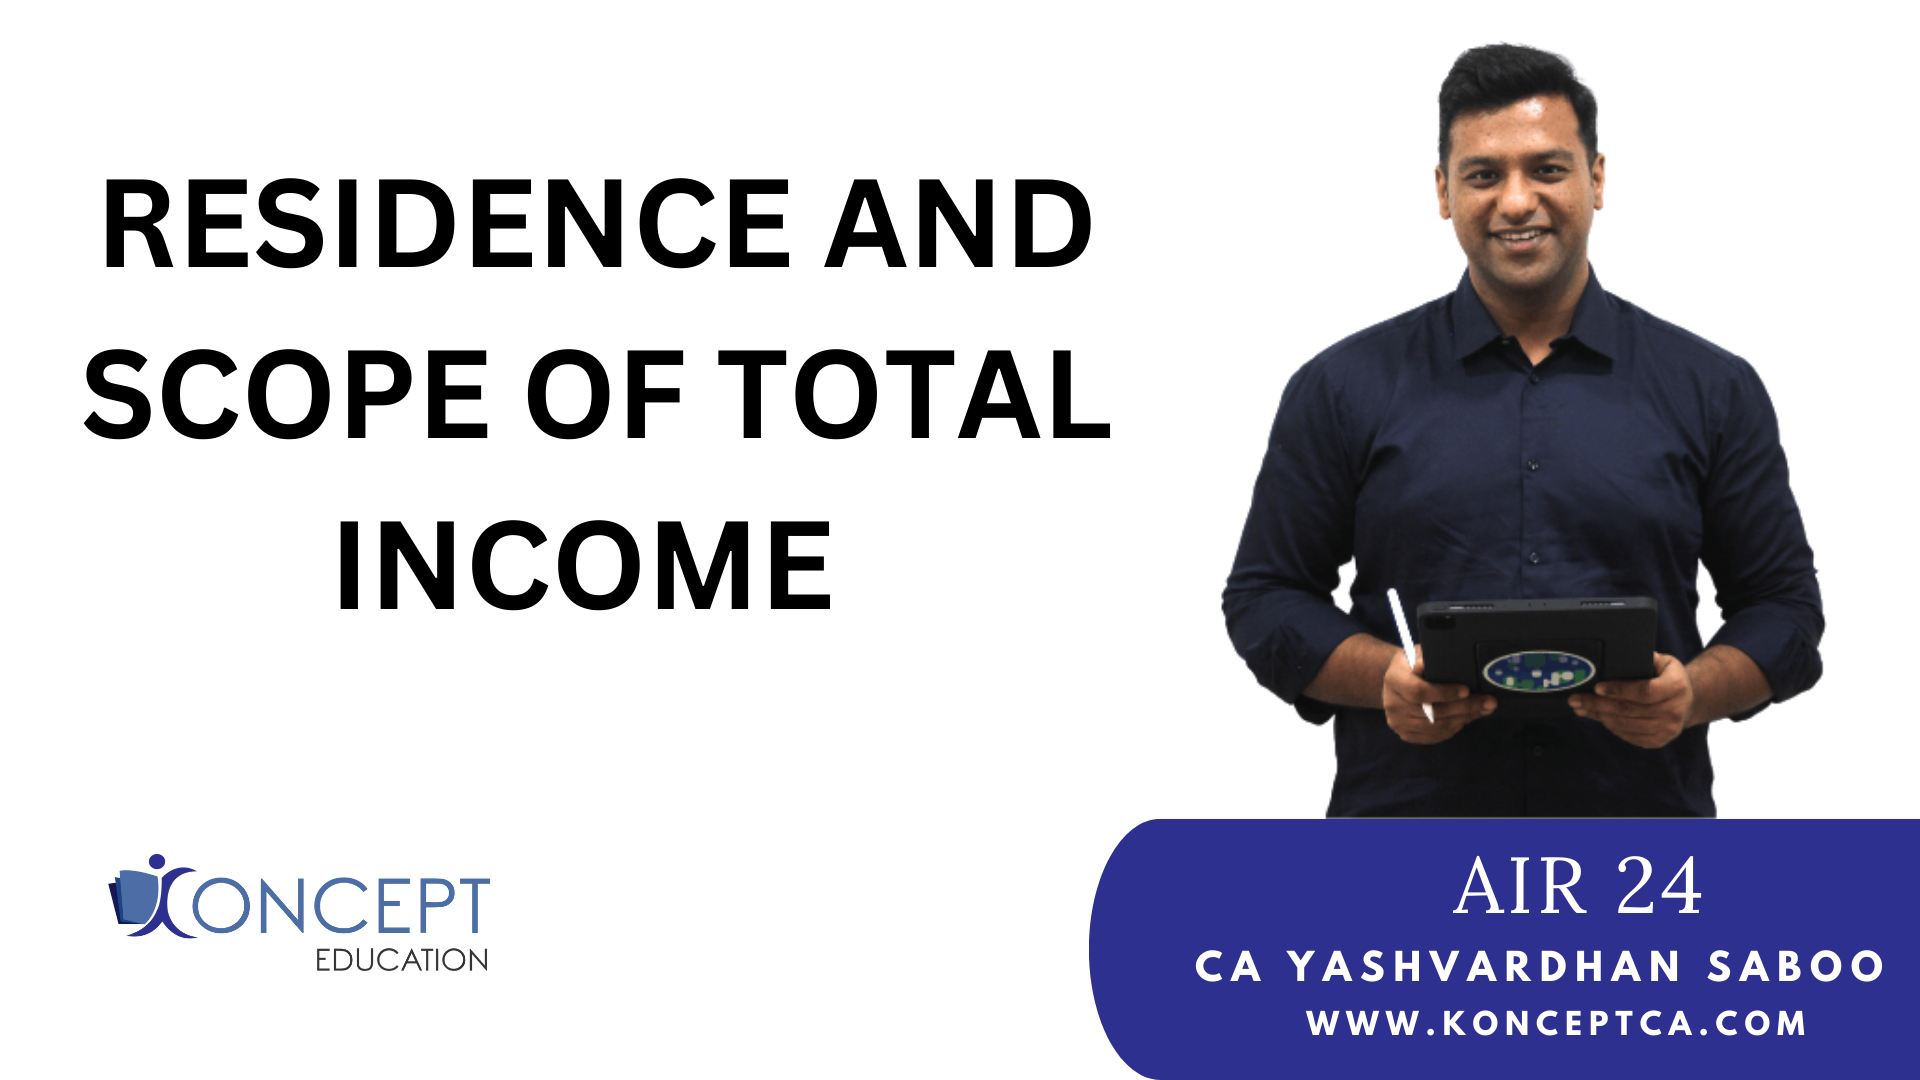 Residence and Scope of Total Income